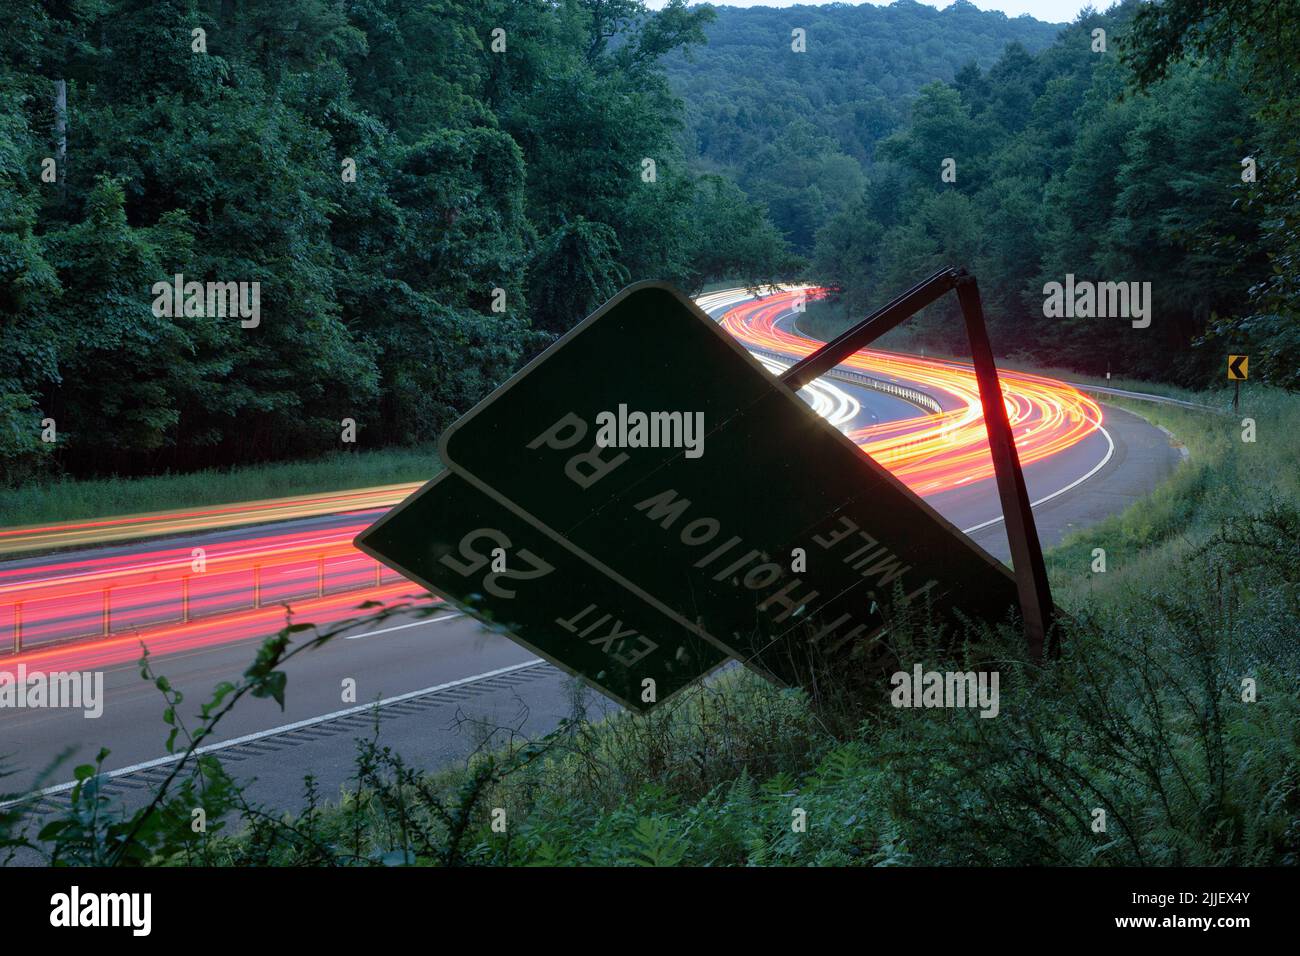 A car crashed through the Peekskill Hollow Road exit sign and proceeded up the embankment and into the woods. All that remains is the damaged sign. Stock Photo